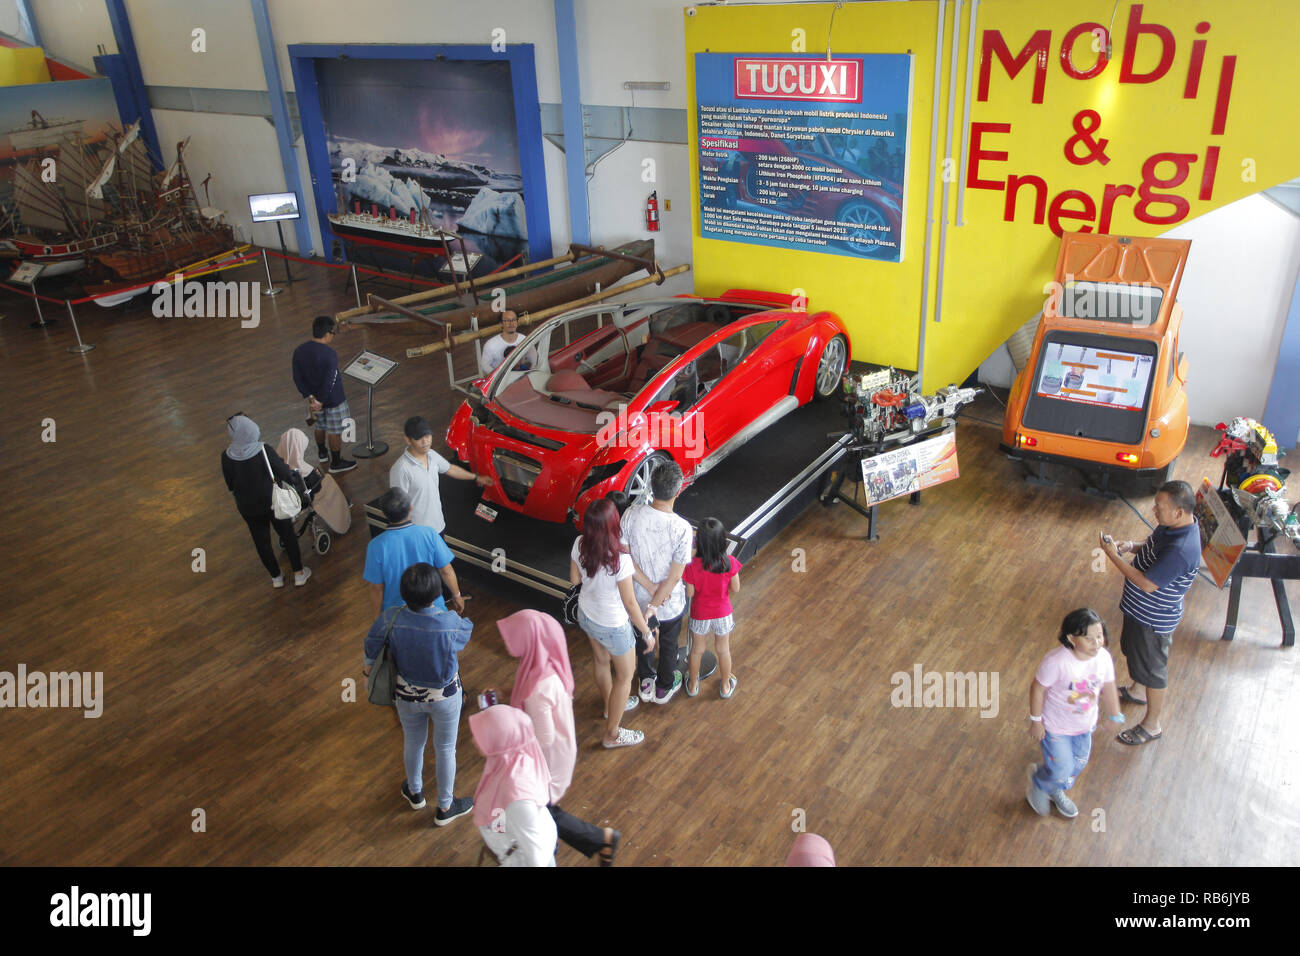 Malang, East Java, Indonesia. 5th Jan, 2019. A number of visitors seen observing the Tucuxi electric car which was damaged by crashing several years ago at the Angkut Museum (Museum of Transportation). This museum has thousands of collections of transportation vehicles from various Credit: Adriana Adinandra/SOPA Images/ZUMA Wire/Alamy Live News Stock Photo